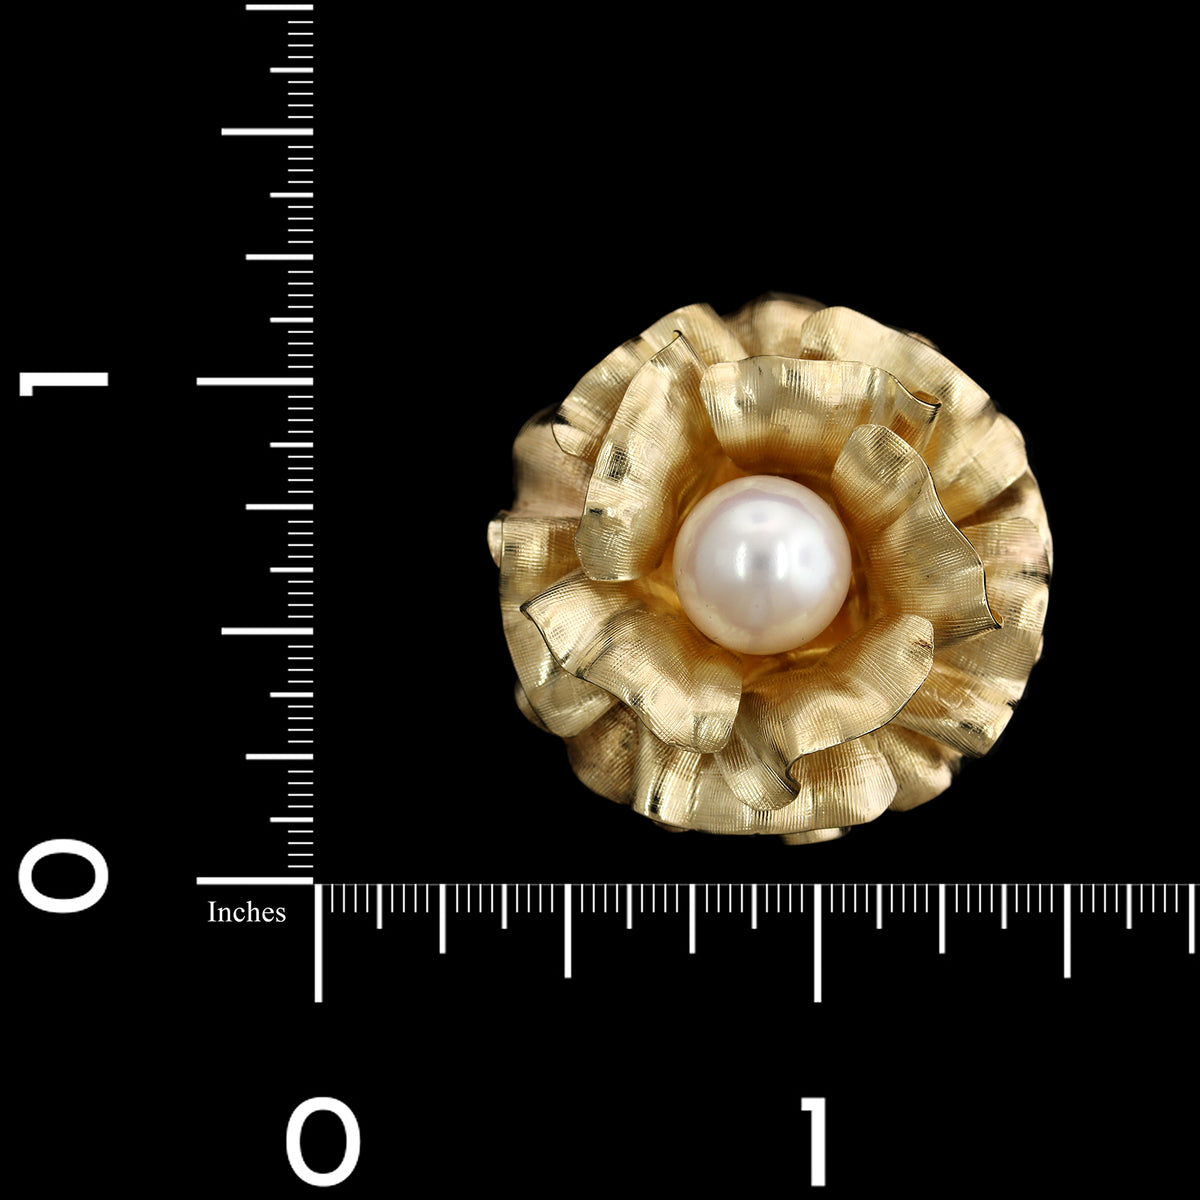 14K Yellow Gold Cultured Pearl Flower Estate Pin